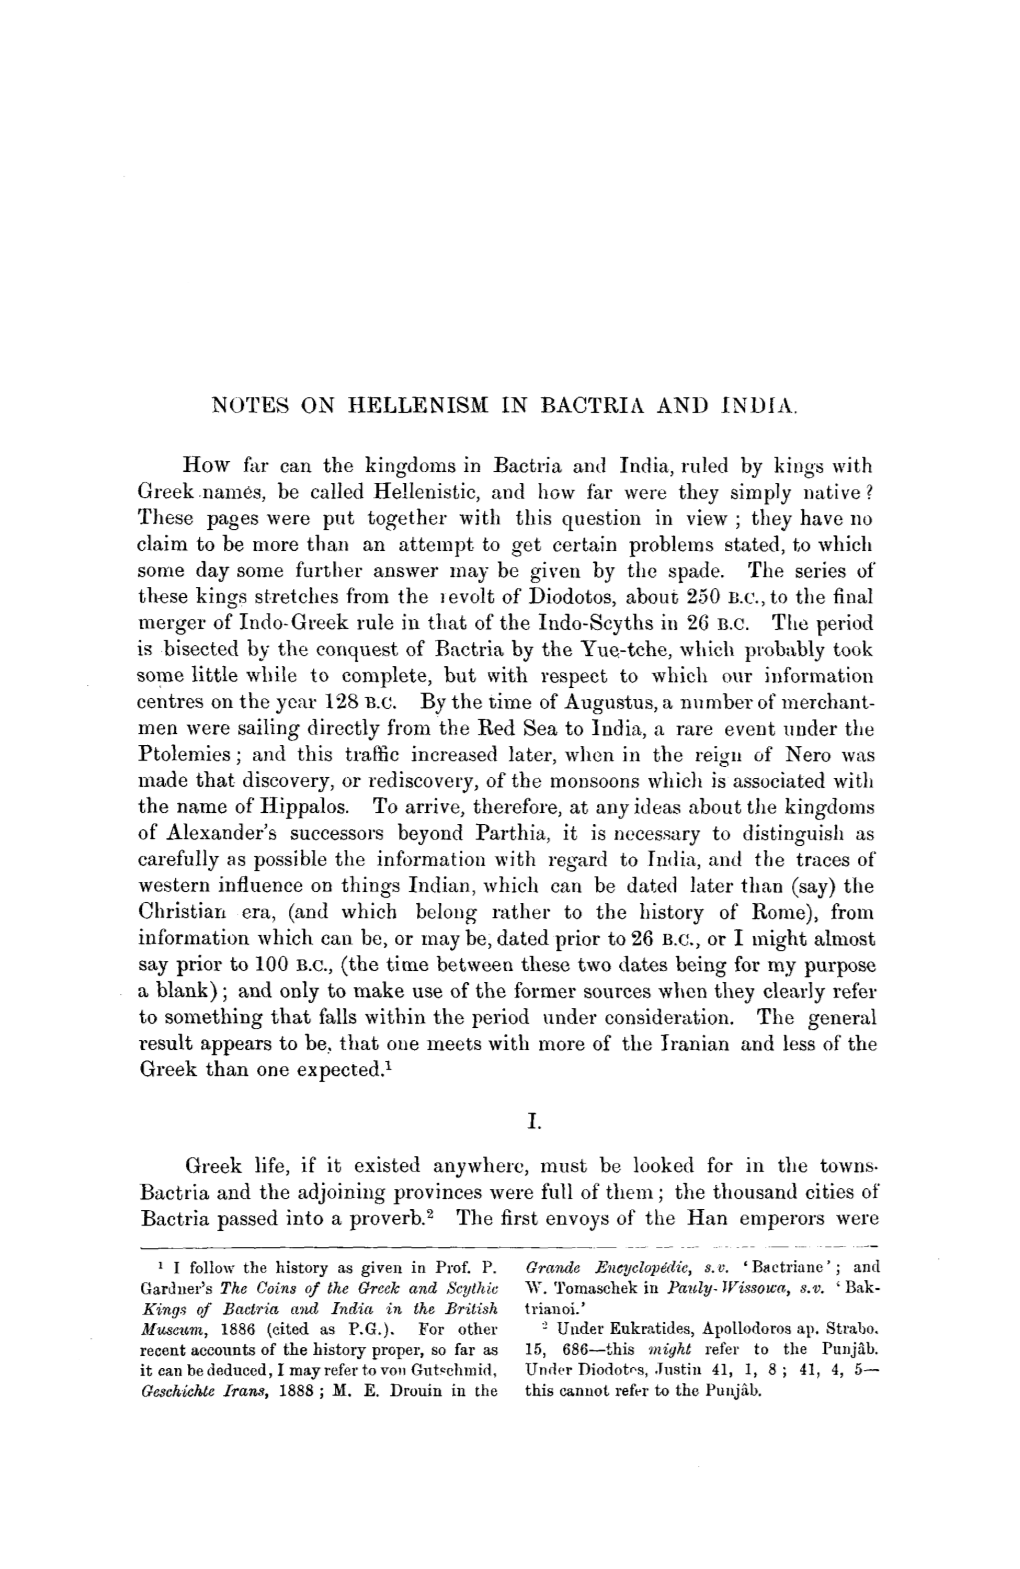 NOTES on HELLENISM in BACTRIA and INDIA. How Far Can The